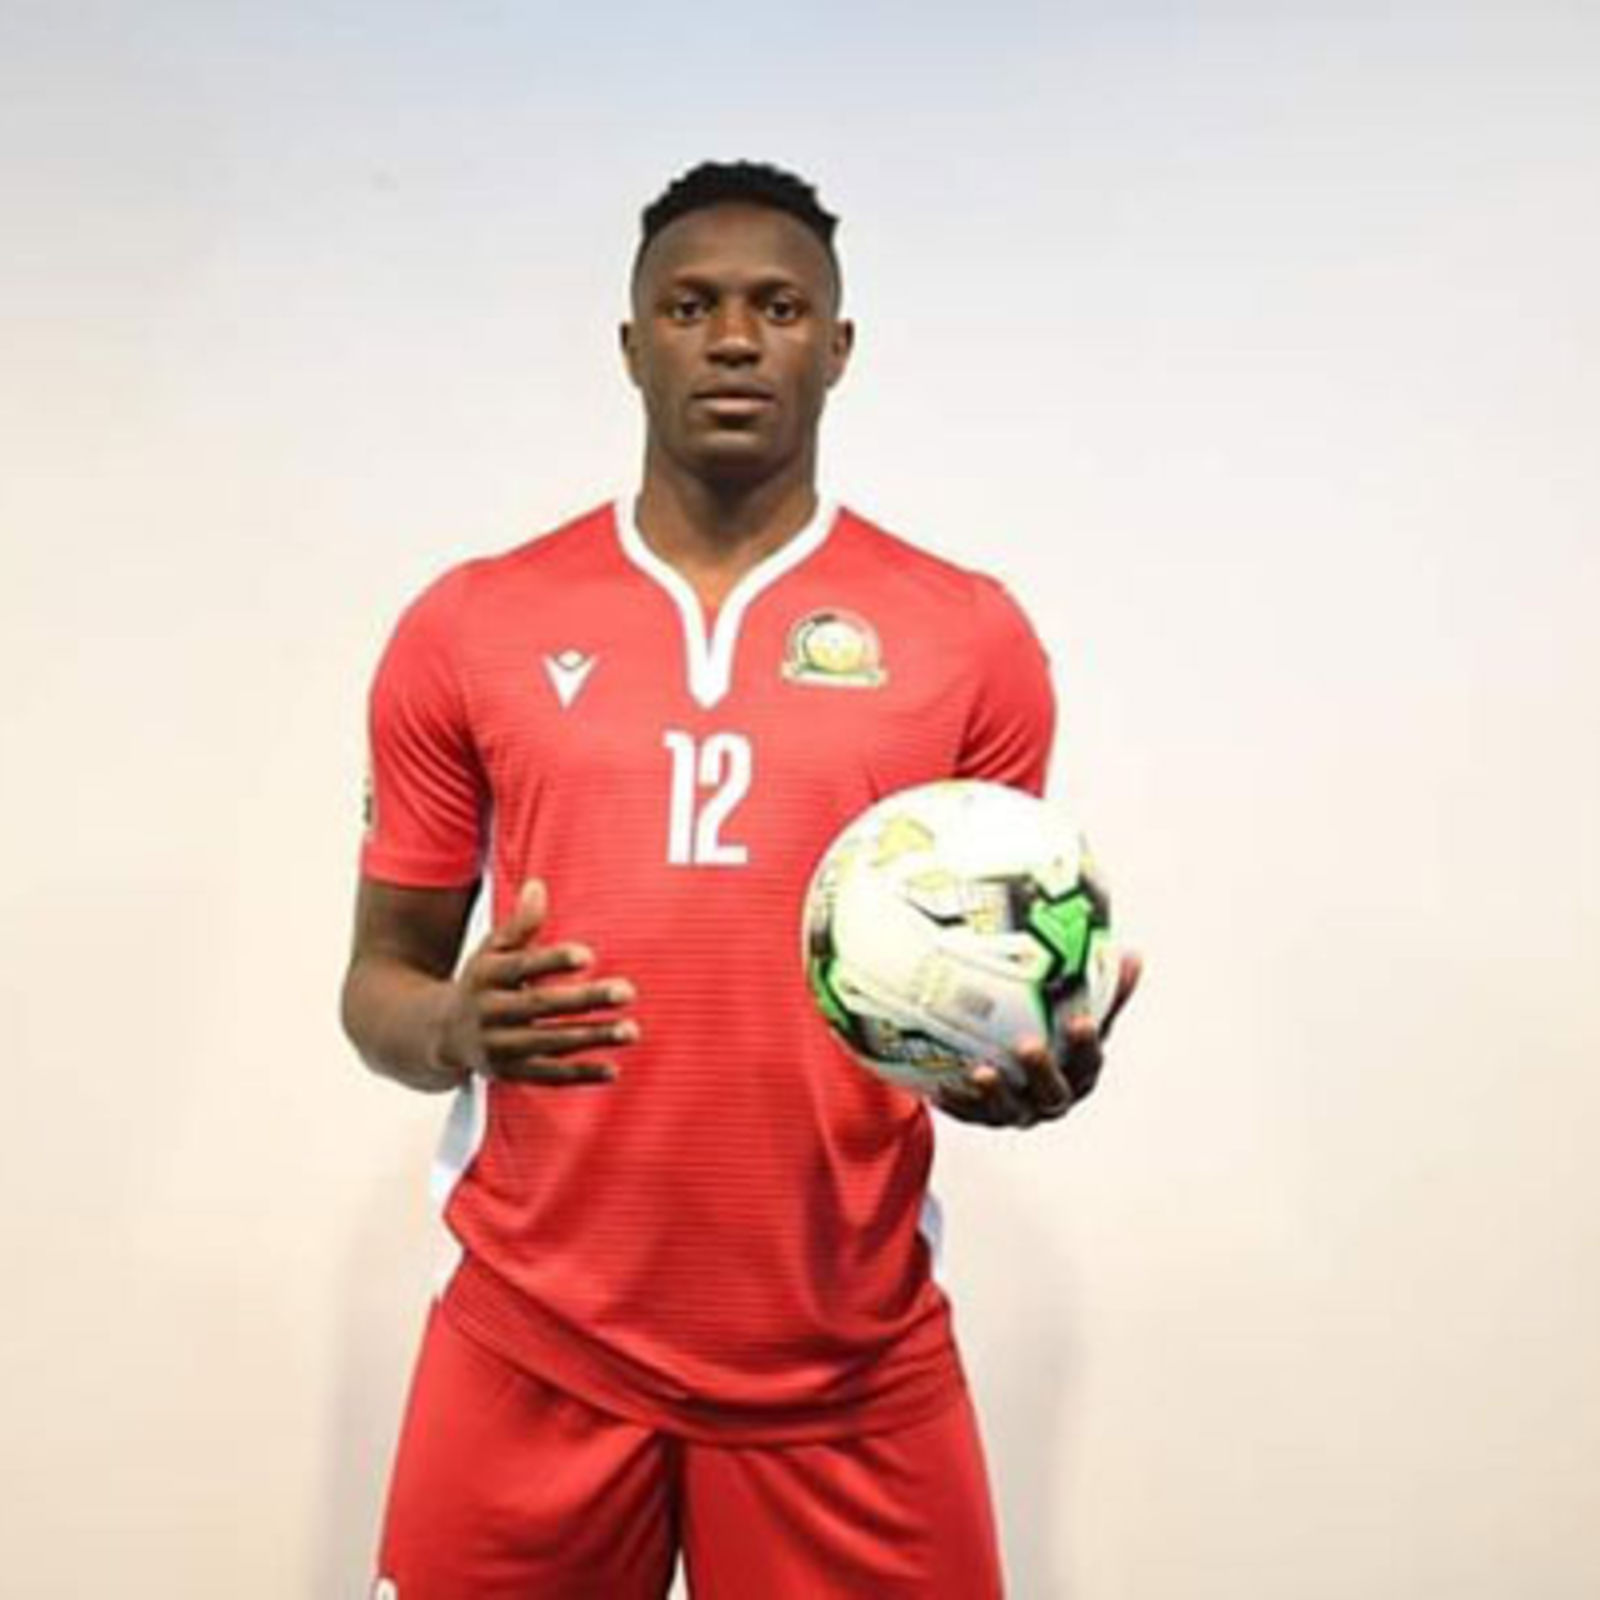 NTV Kenya - Here is the old Harambee Stars kit that will go on